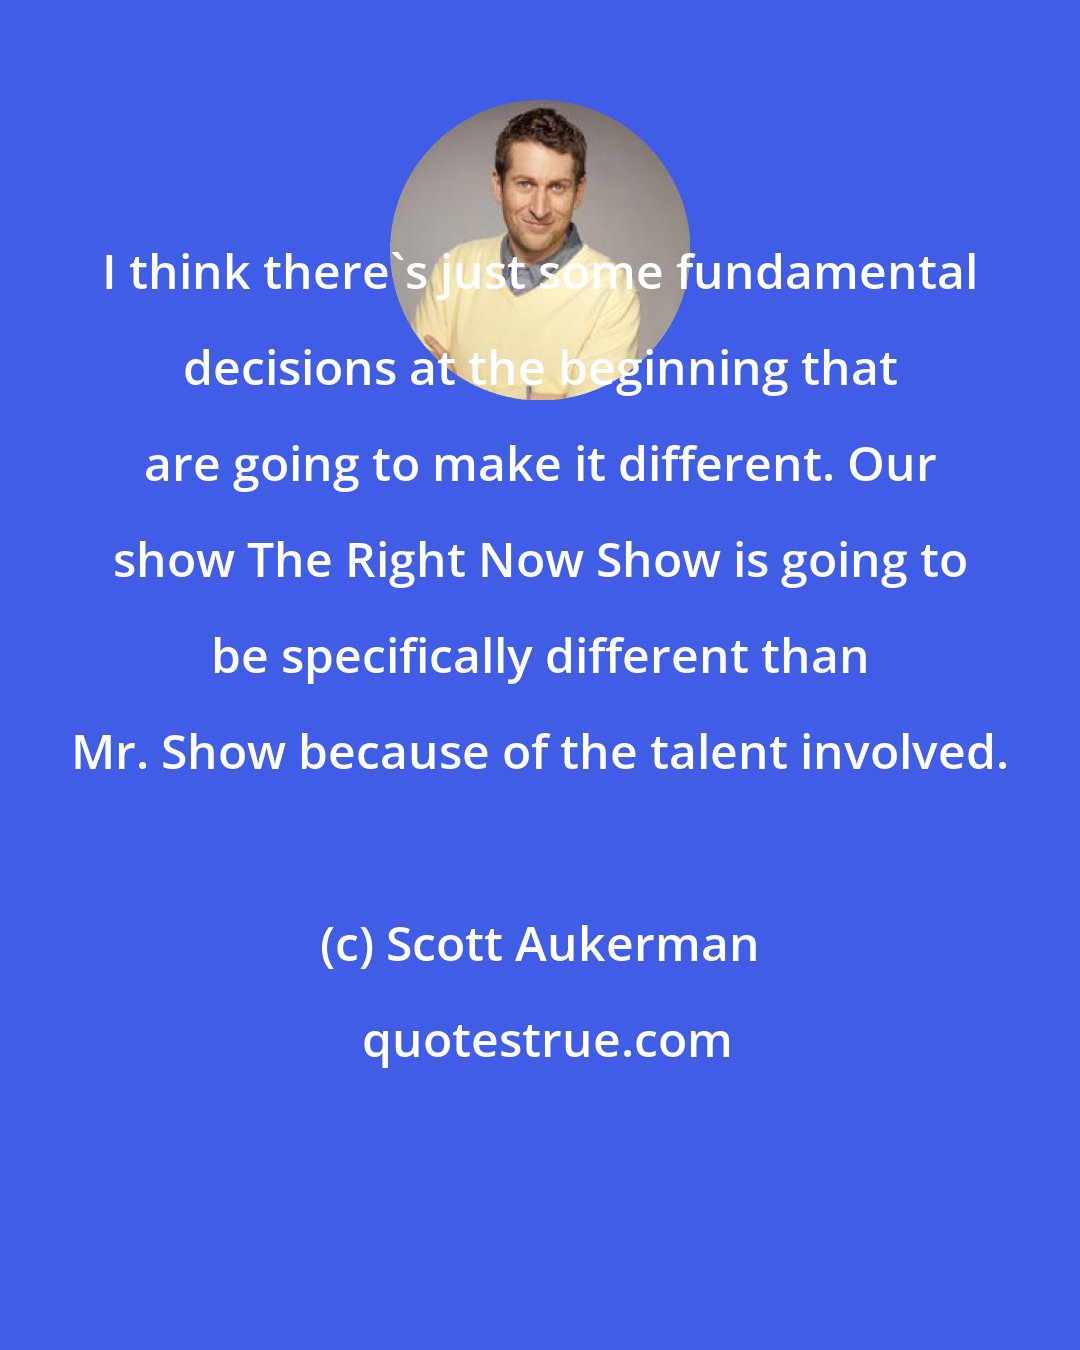 Scott Aukerman: I think there's just some fundamental decisions at the beginning that are going to make it different. Our show The Right Now Show is going to be specifically different than Mr. Show because of the talent involved.